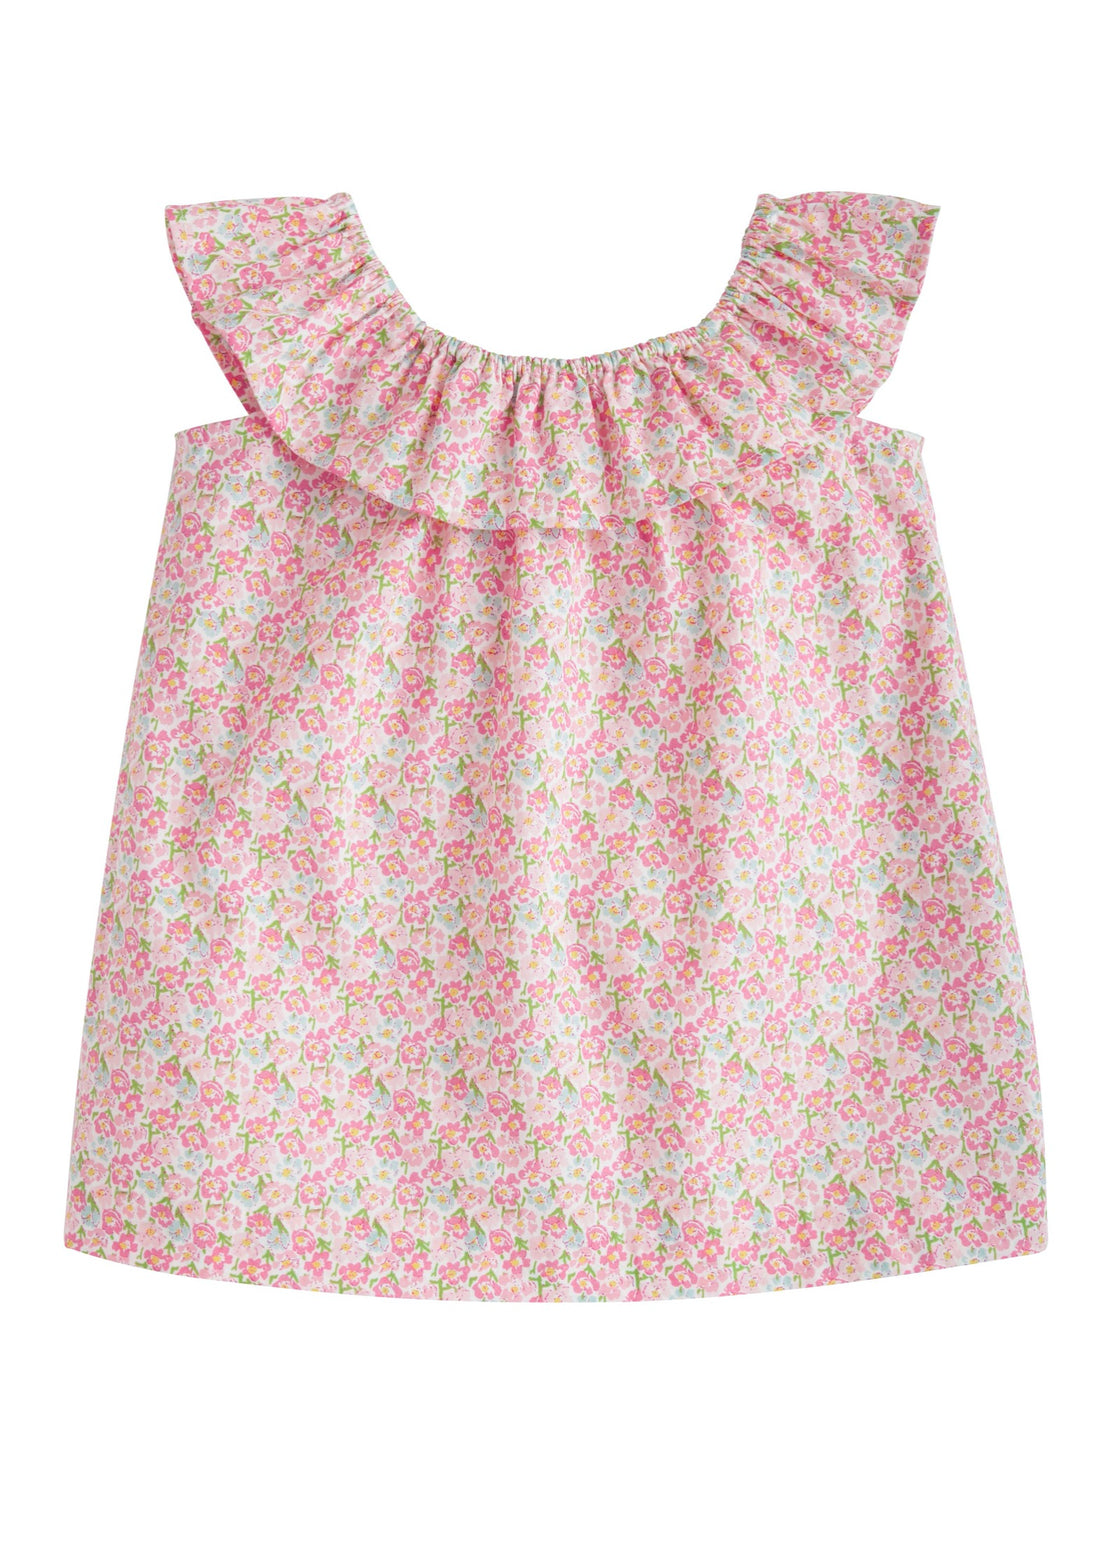 BISBY ruffled tank in pink and light blue floral pattern